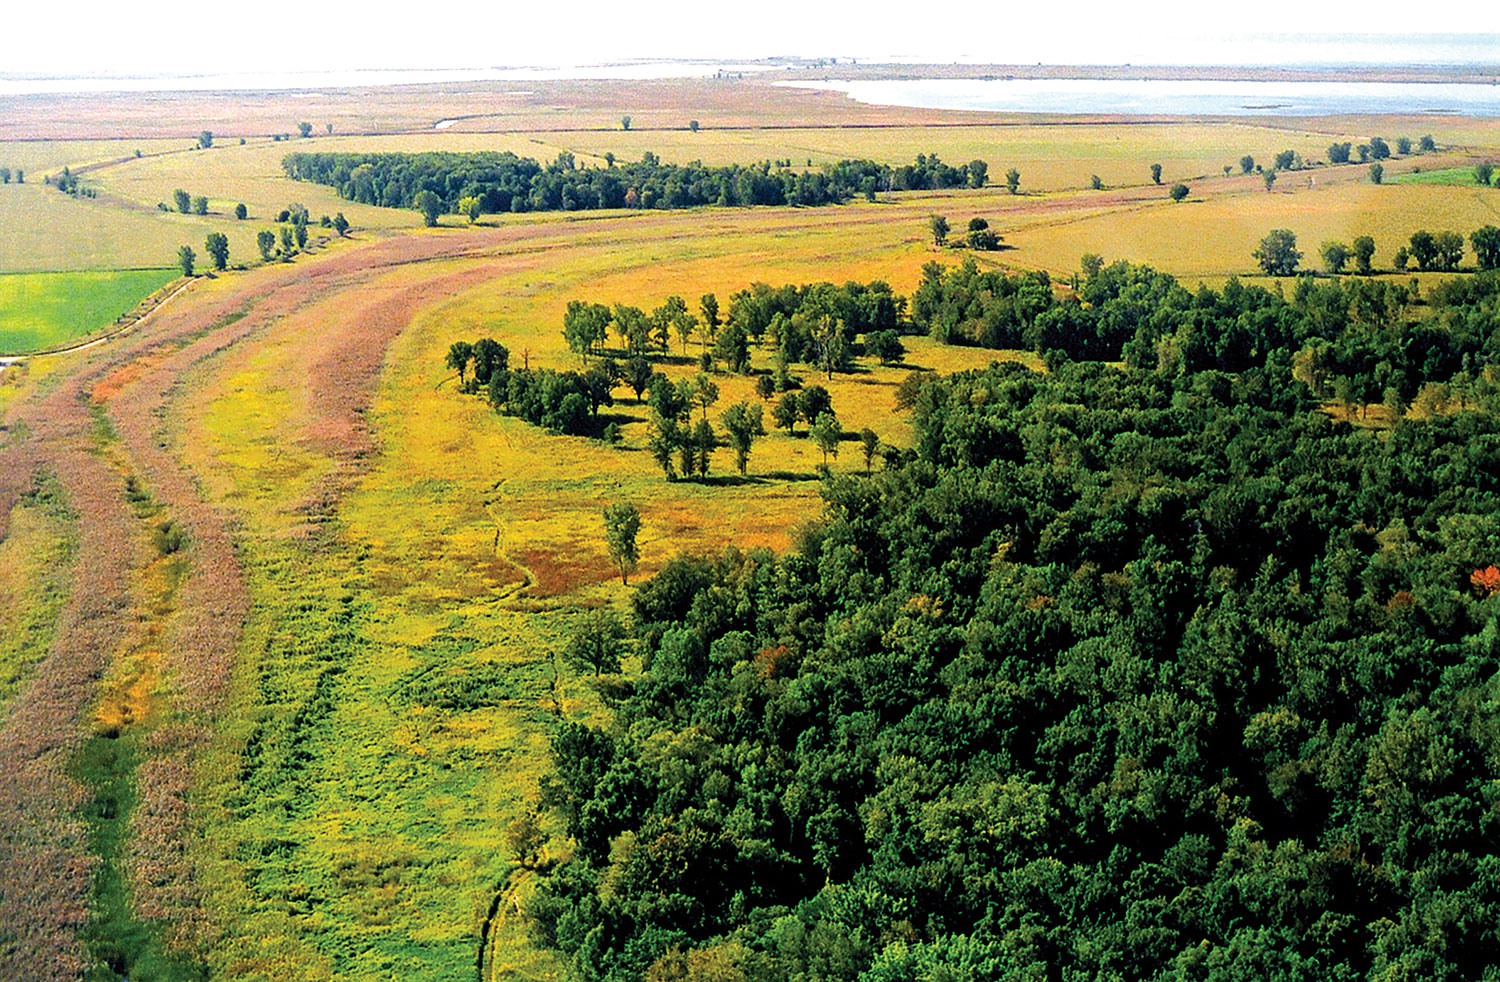 Intangible heritage can inform our approach to the environment. The Bkejwanong territory has been cared for by the Walpole Island First Nation for many generations through traditional and sustainable ecological approaches to land and water. Aerial view of Walpole Island First Nation showing Potawatomi Prairie in 2004.